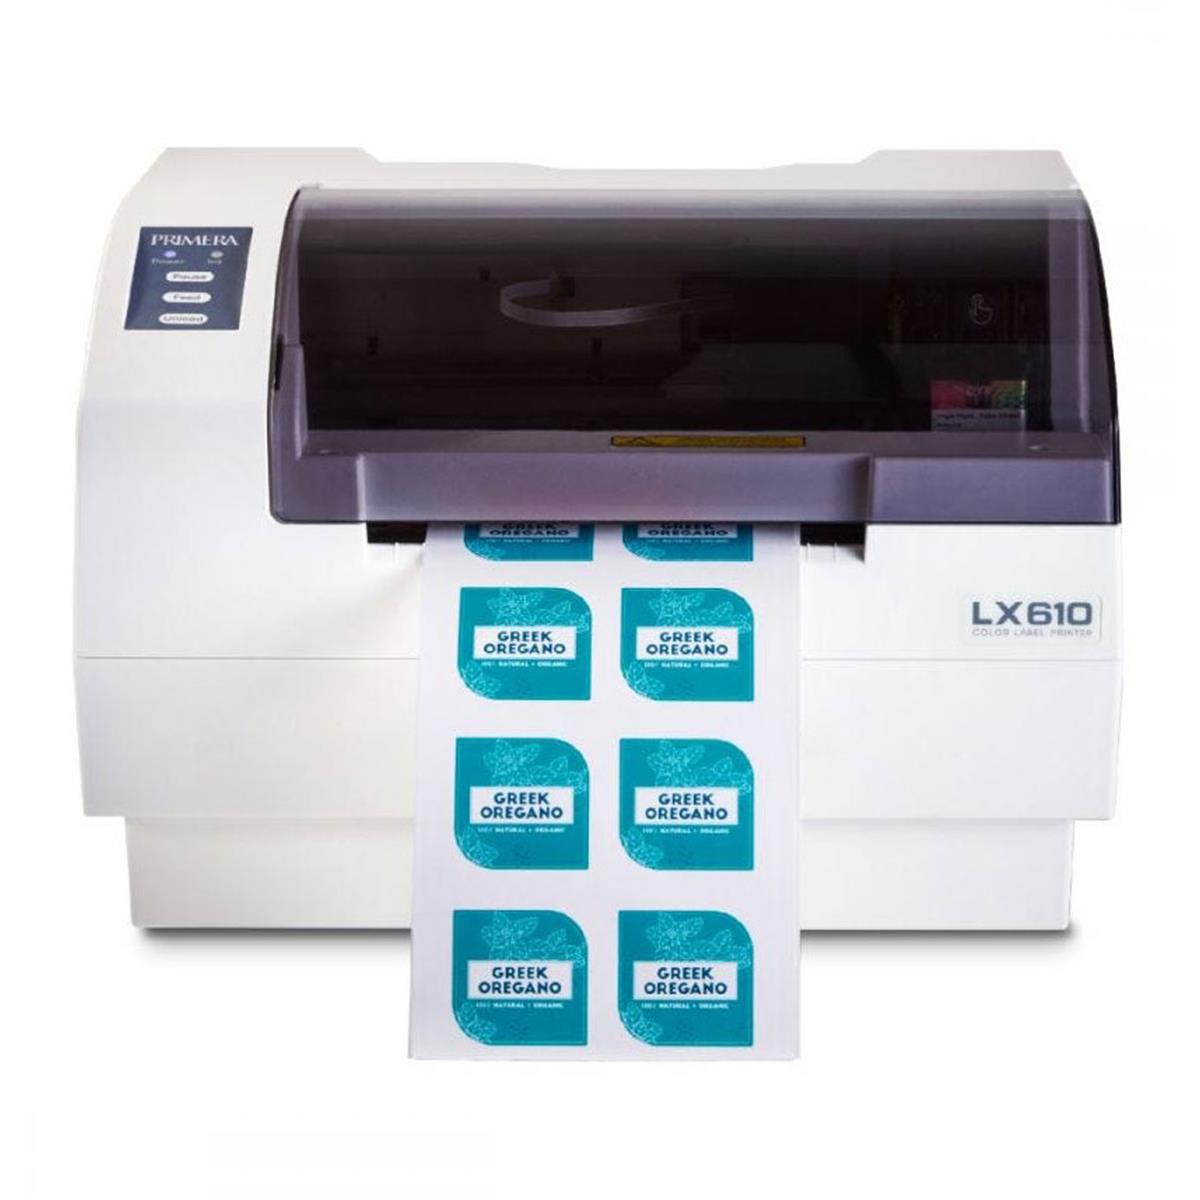 Image of Primera Technology LX610 Color Label Thermal Inkjet Printer with Plotter/Cutter